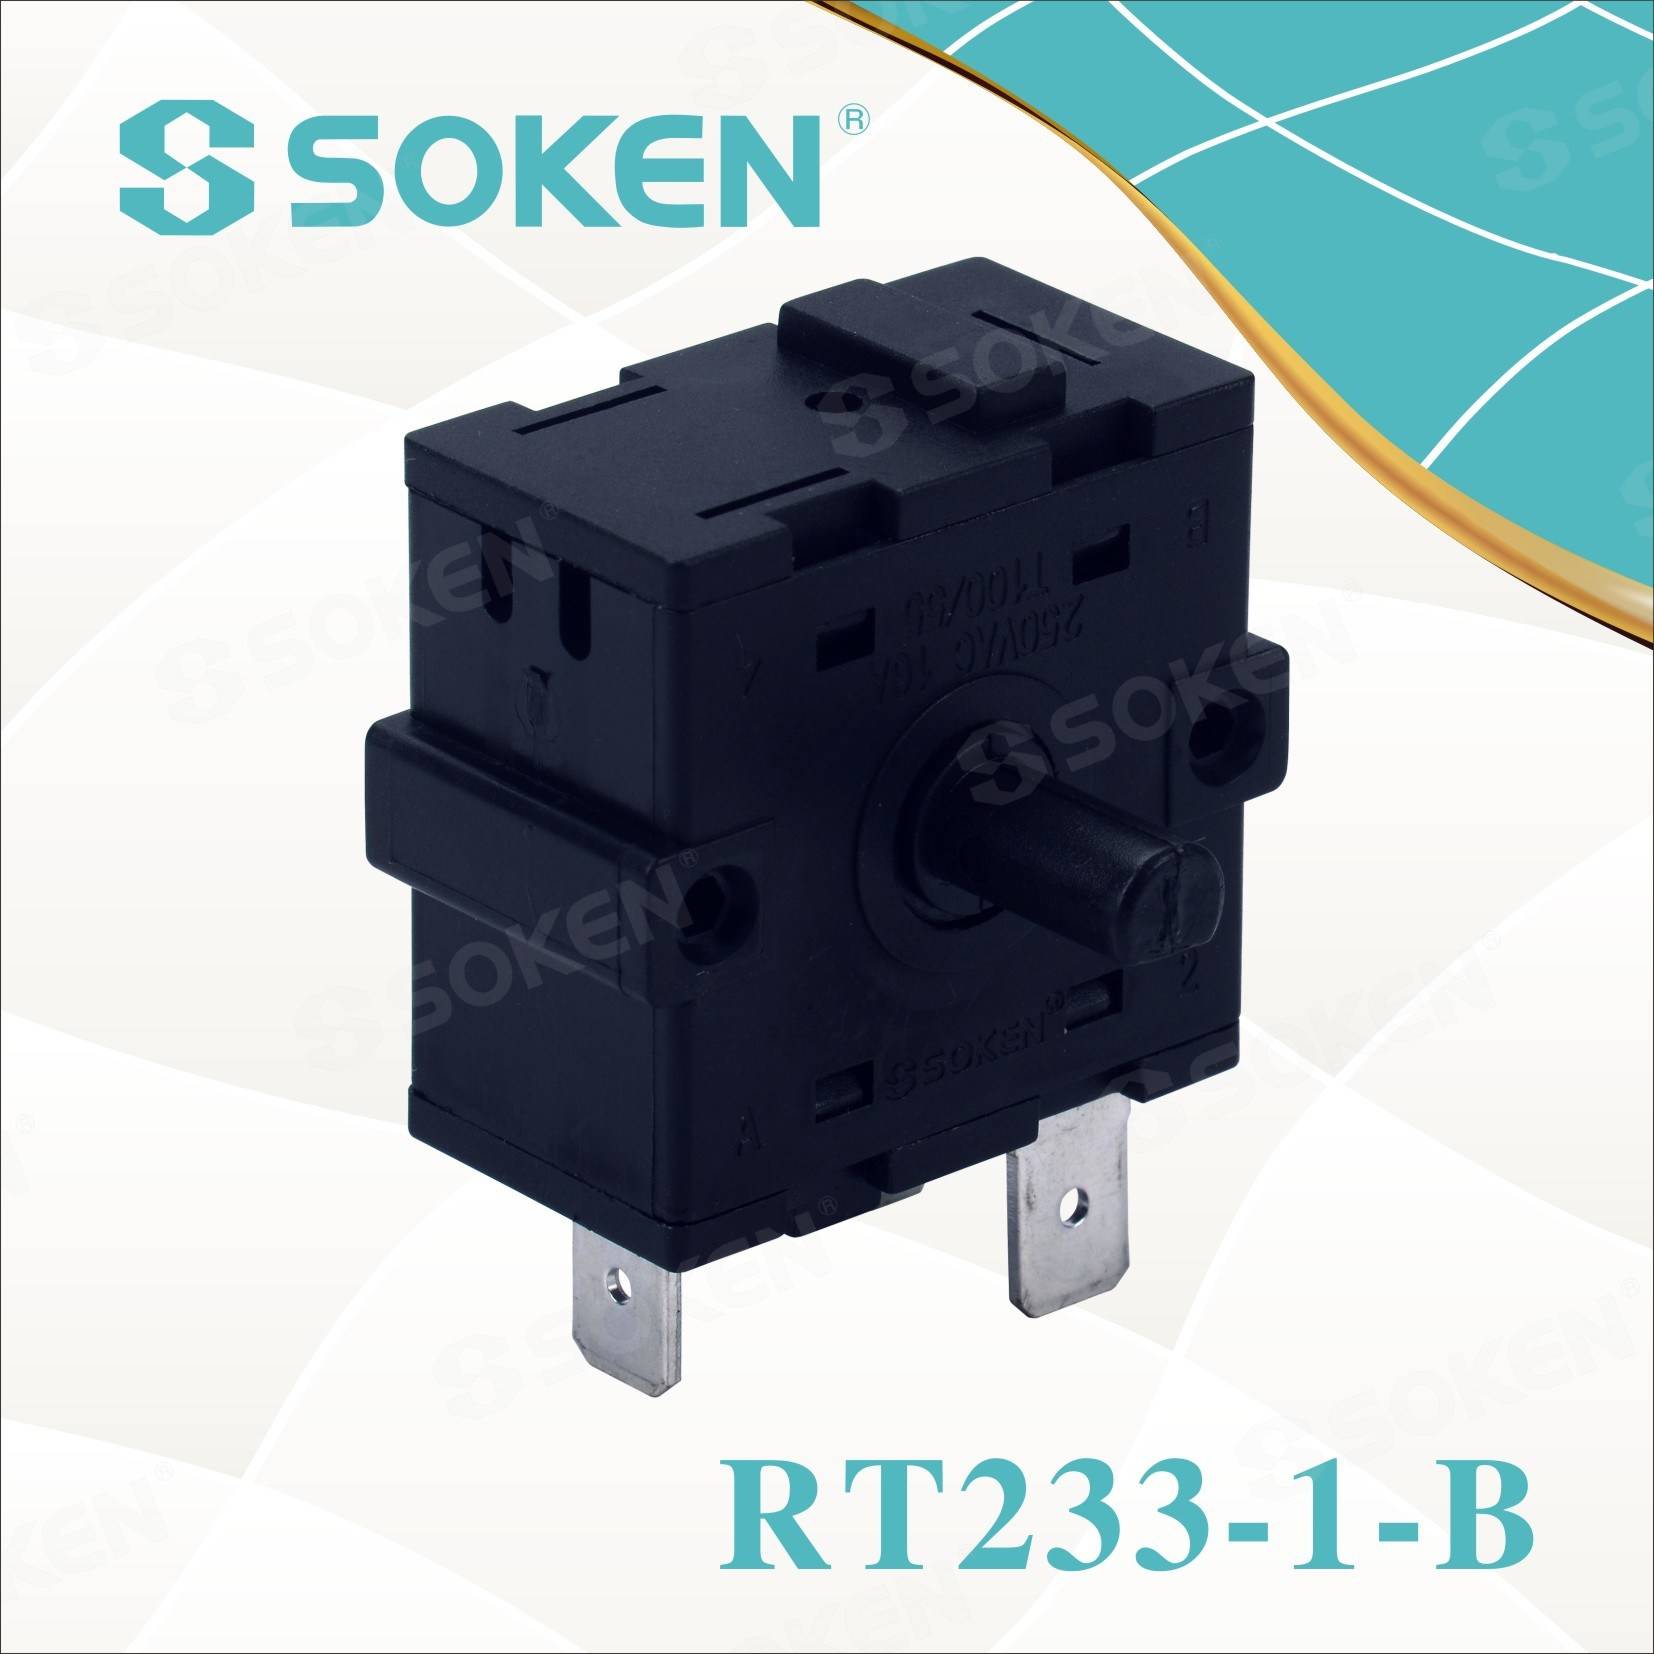 Quoted price for Marine Light Control Panel -
 Soken Rotary Switch for Heater – Master Soken Electrical